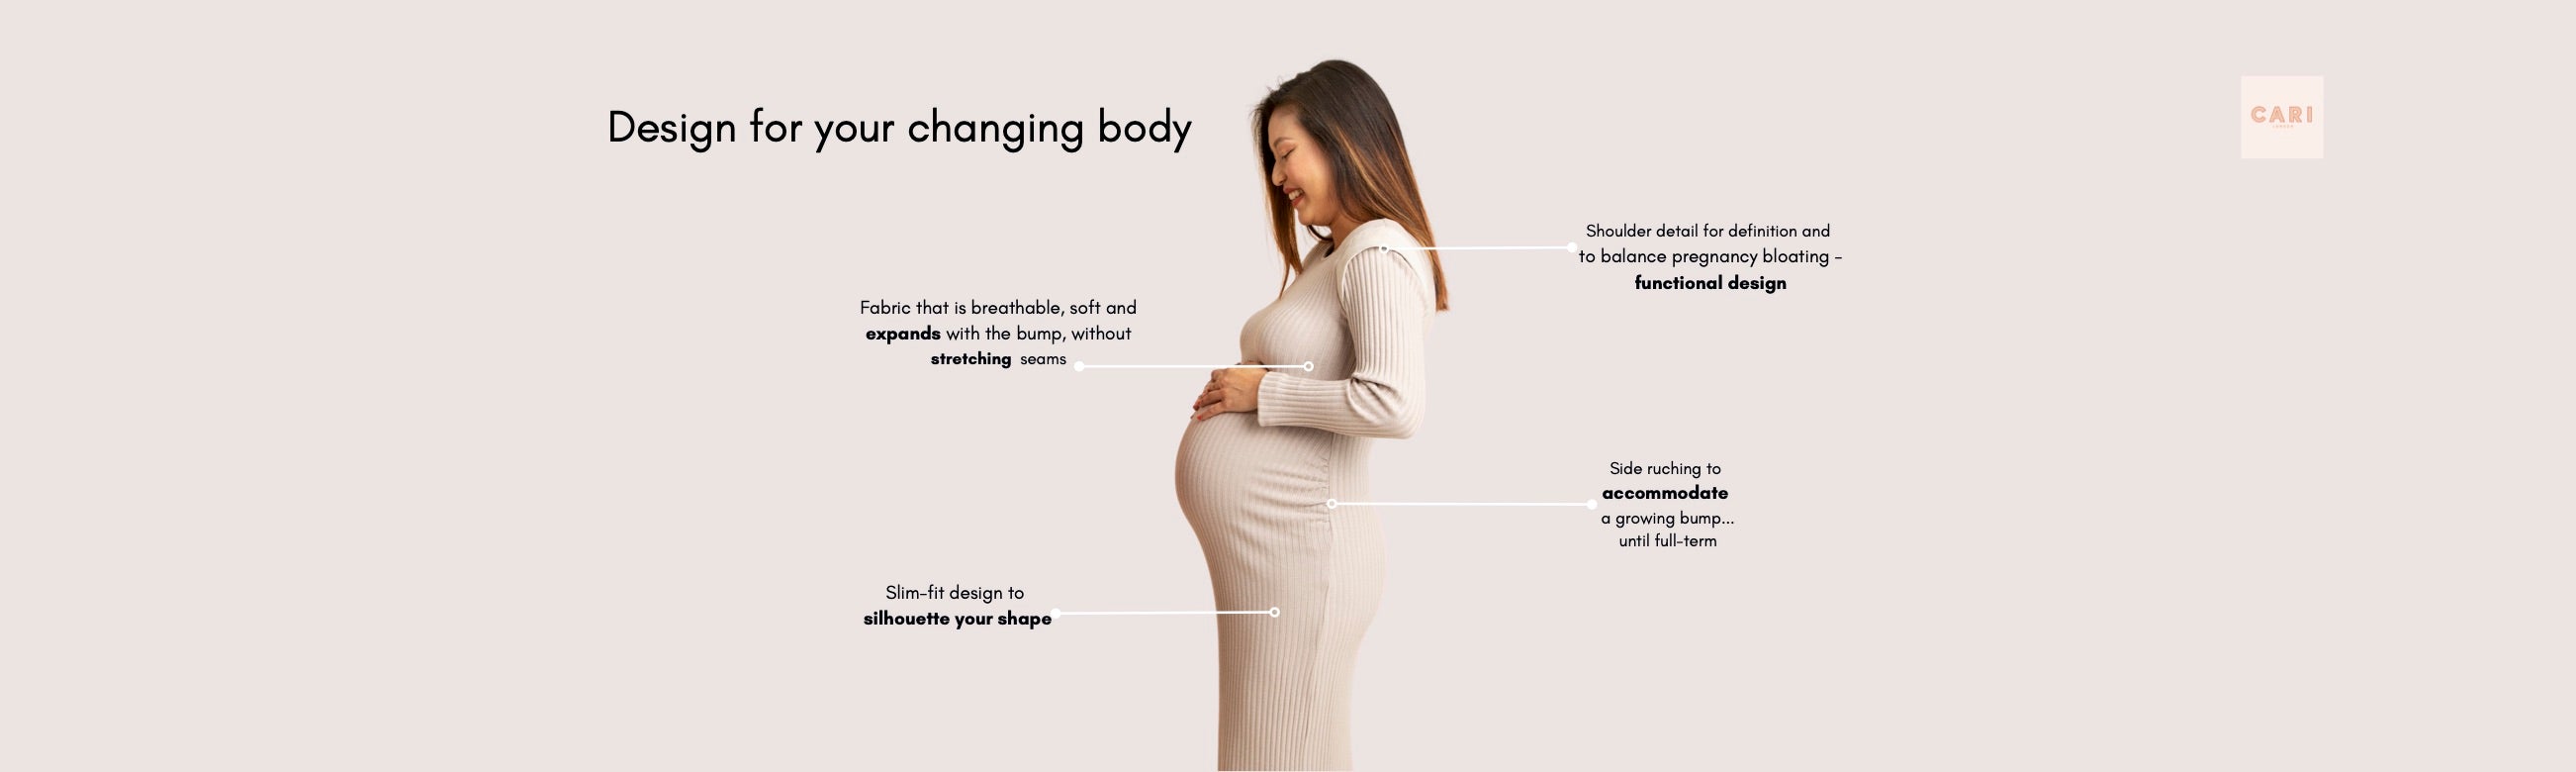 The 5 reasons why you need maternity clothing